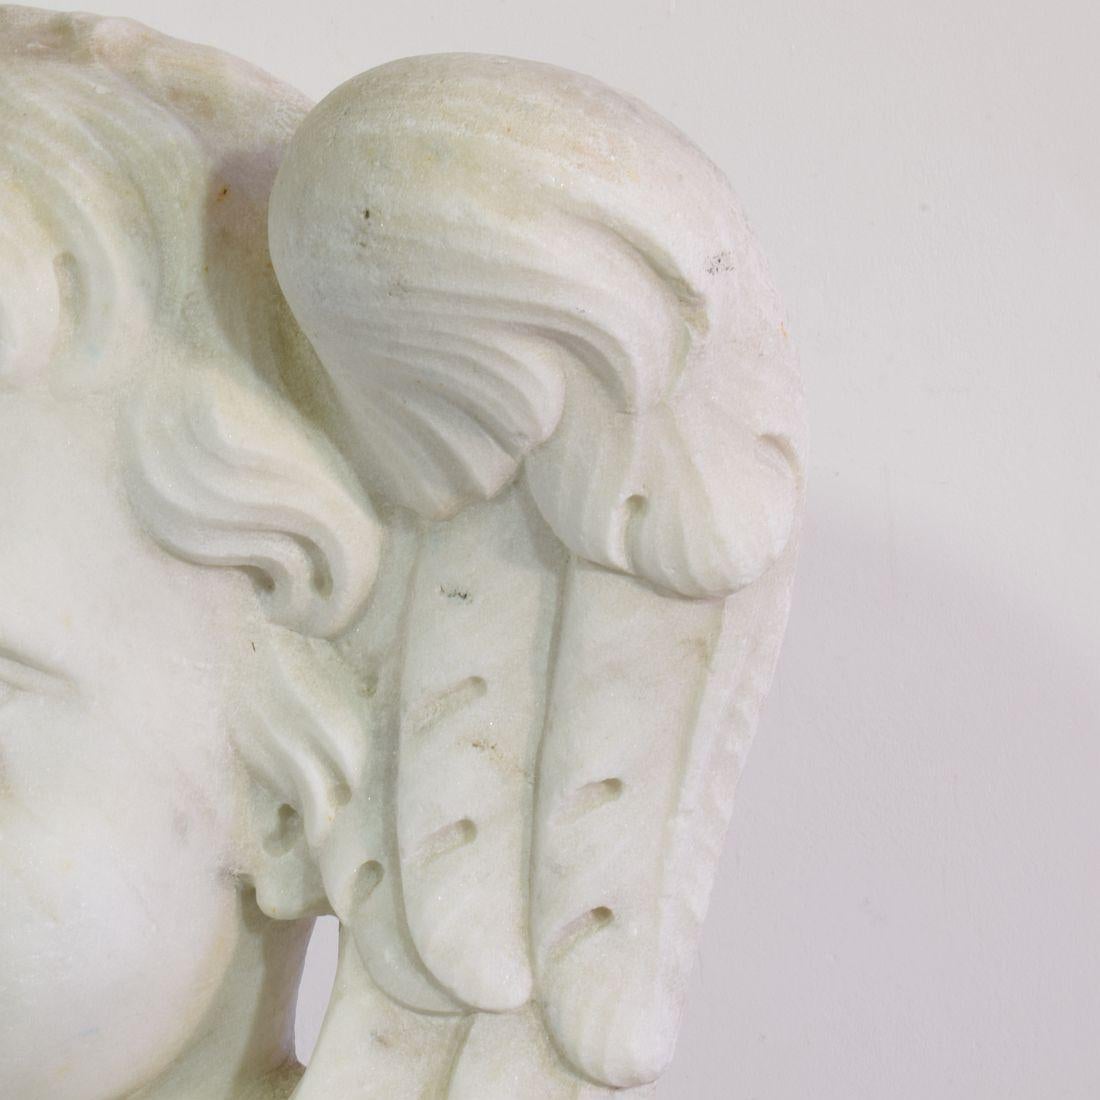 Italian, 17th / 18th Century Carved White Marble Winged Angel Head Ornament For Sale 7